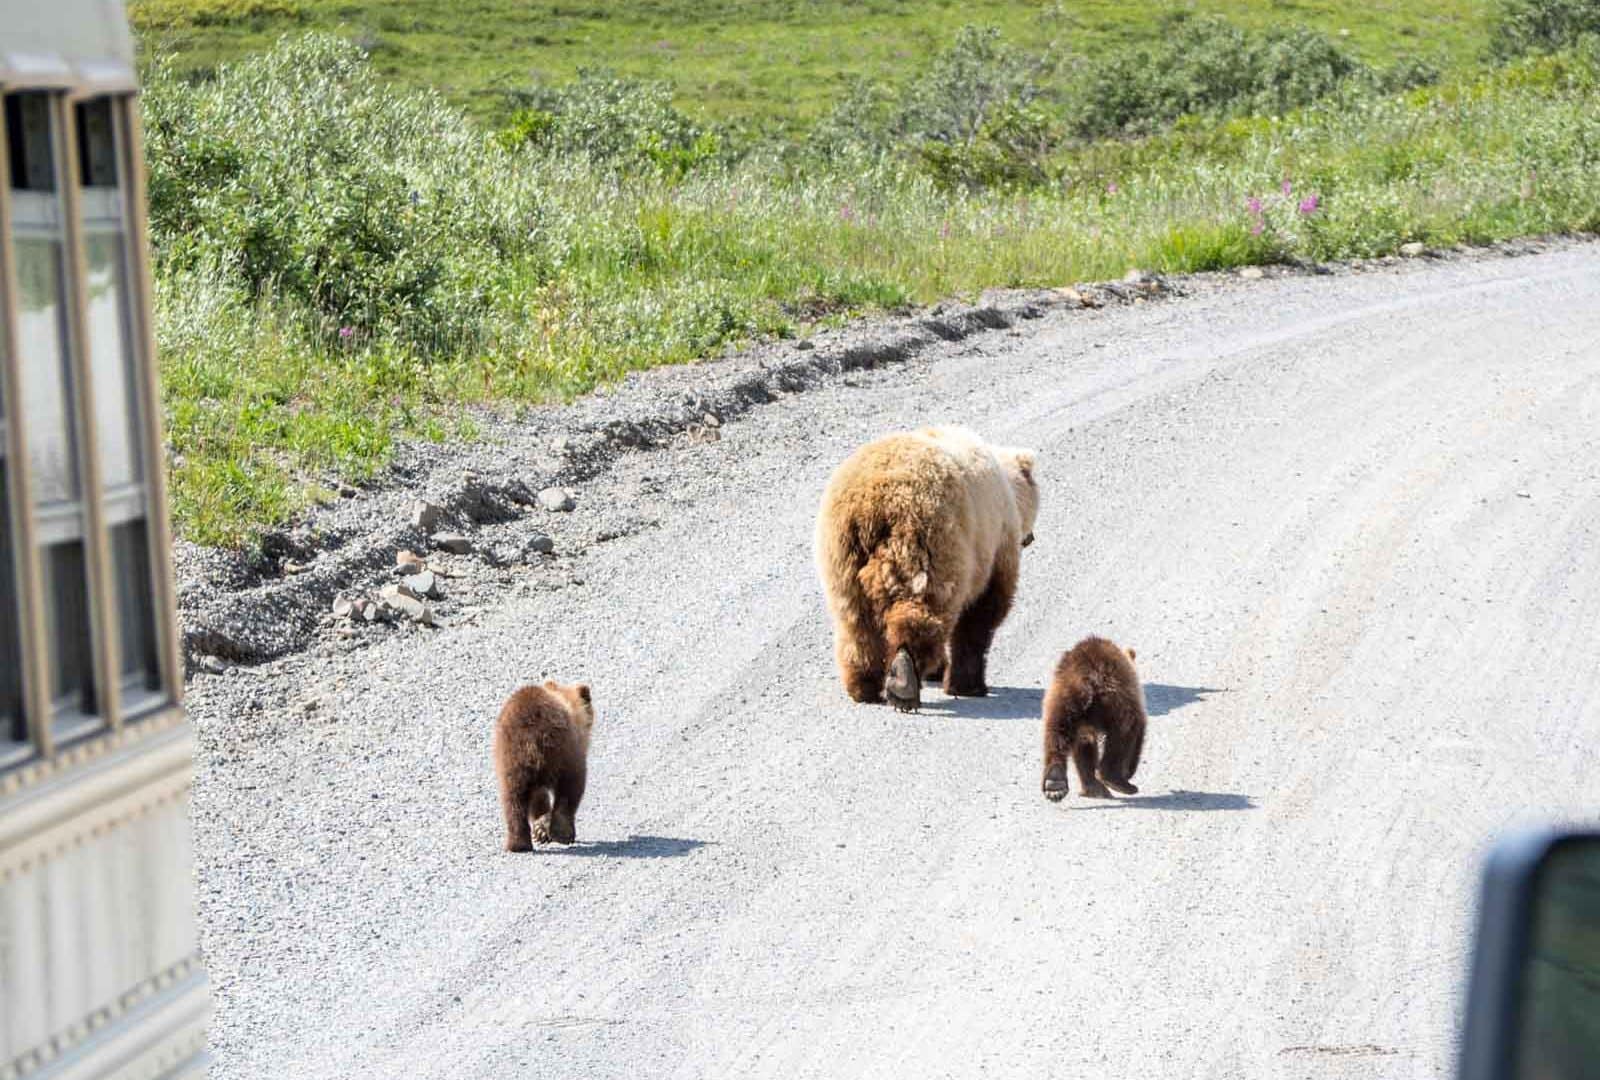 Best Of Yukon & Alaska - Grizzly Bear Family in Denali National Park and Preserve